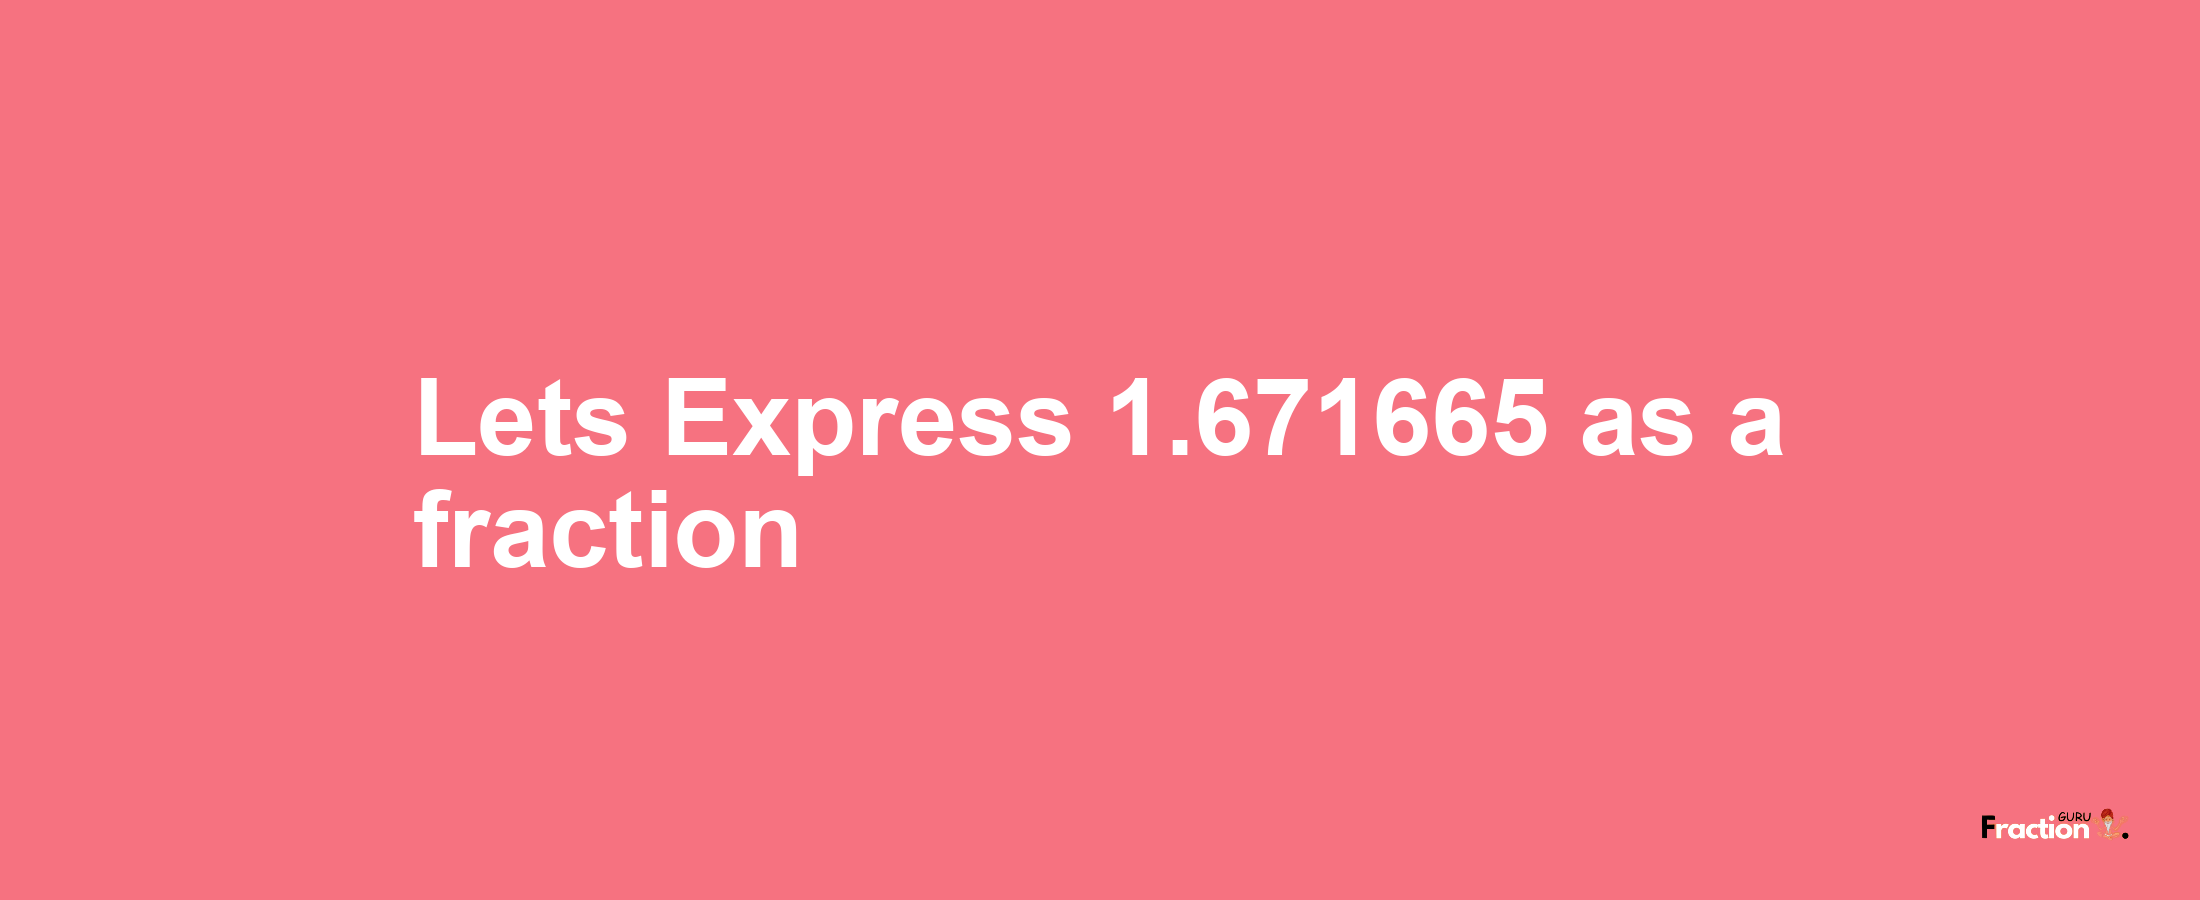 Lets Express 1.671665 as afraction